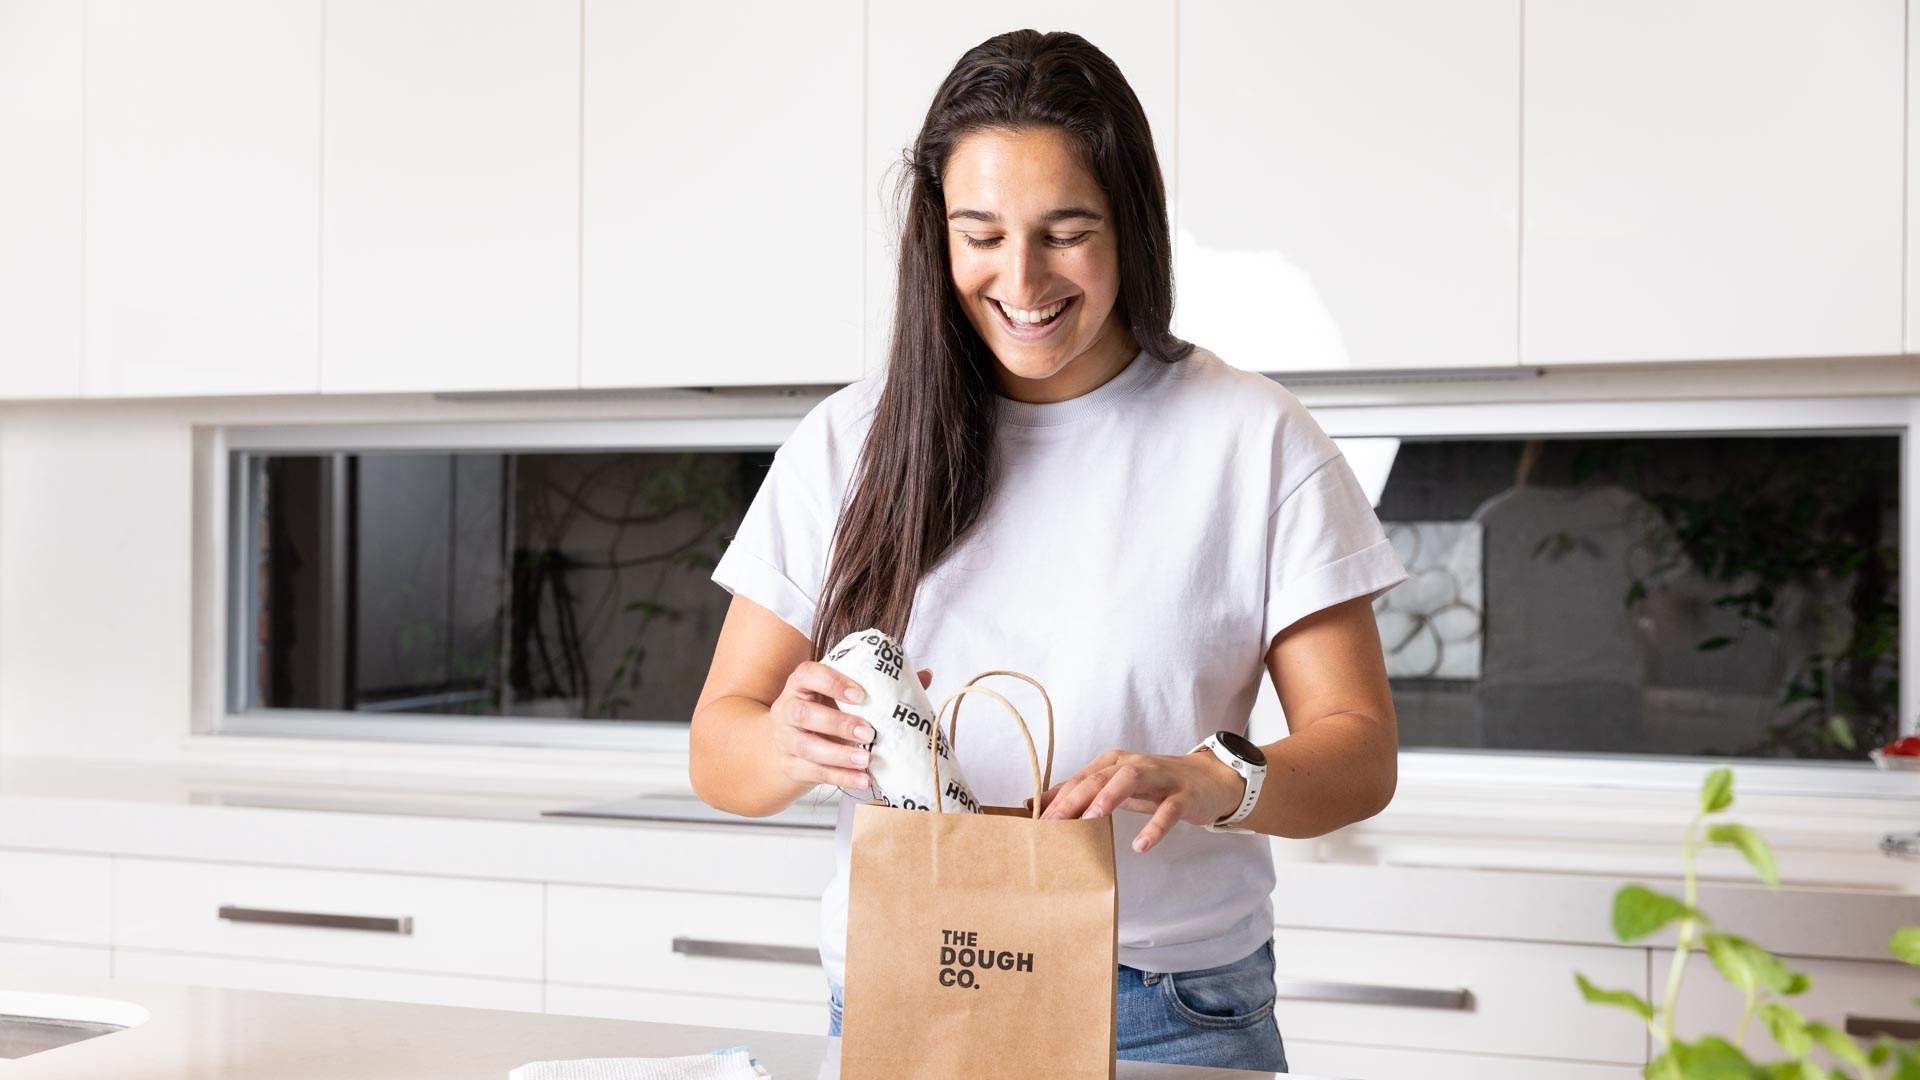 Makin' Dough: How a Melbourne Law Student Used Lockdown to Launch a Ready-to-Bake Cookie Business